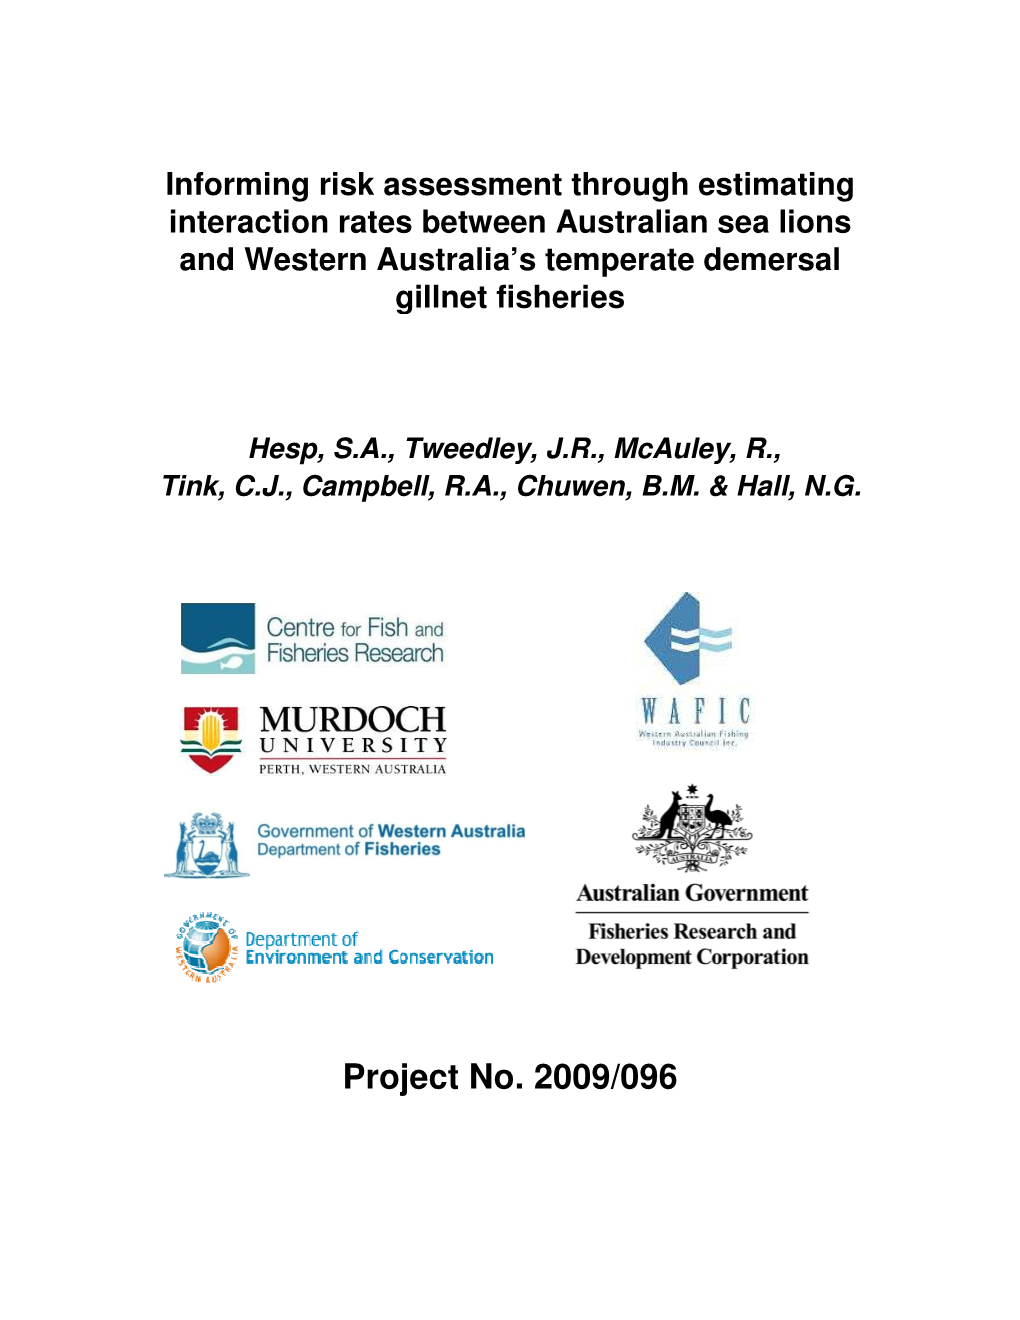 Informing Risk Assessment Through Estimating Interaction Rates Between Australian Sea Lions and Western Australia’S Temperate Demersal Gillnet Fisheries